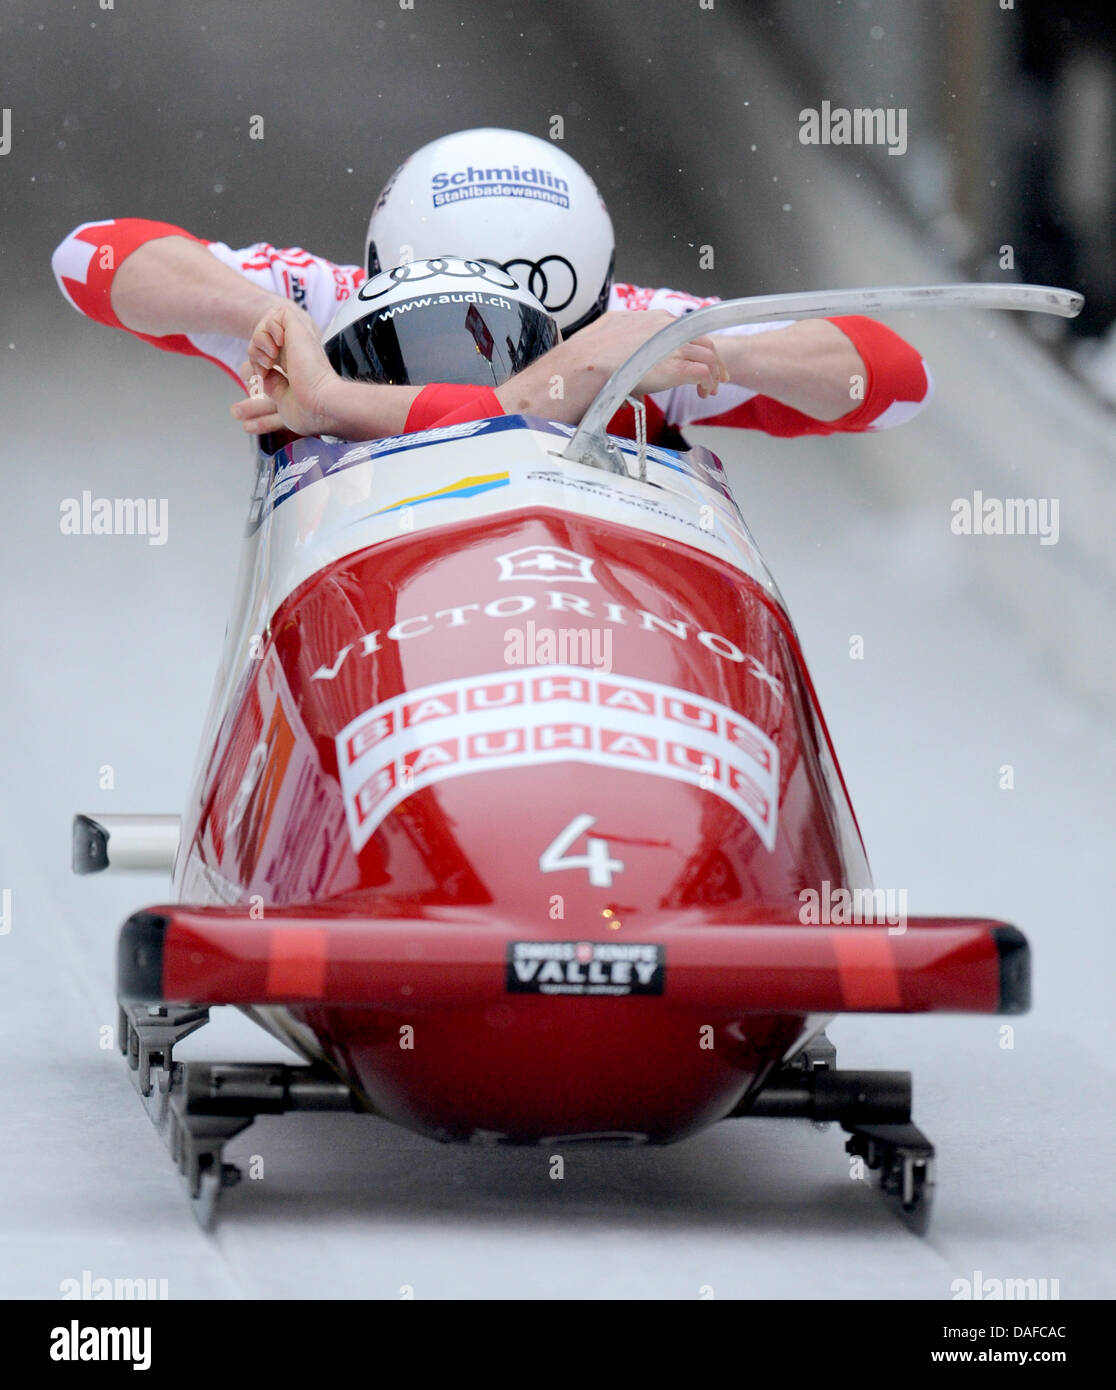 Swiss bob-sleighers Beat Hefti and Thomas Lamparter are pictured during their third run at the FIBT Bob & Skeleton World Championships 2011 in Koenigsee, Germany, 19 Februaray 2011. The Bob/Skeleton World Championships take place until 27 February 2011. Photo: Tobias Hase Stock Photo